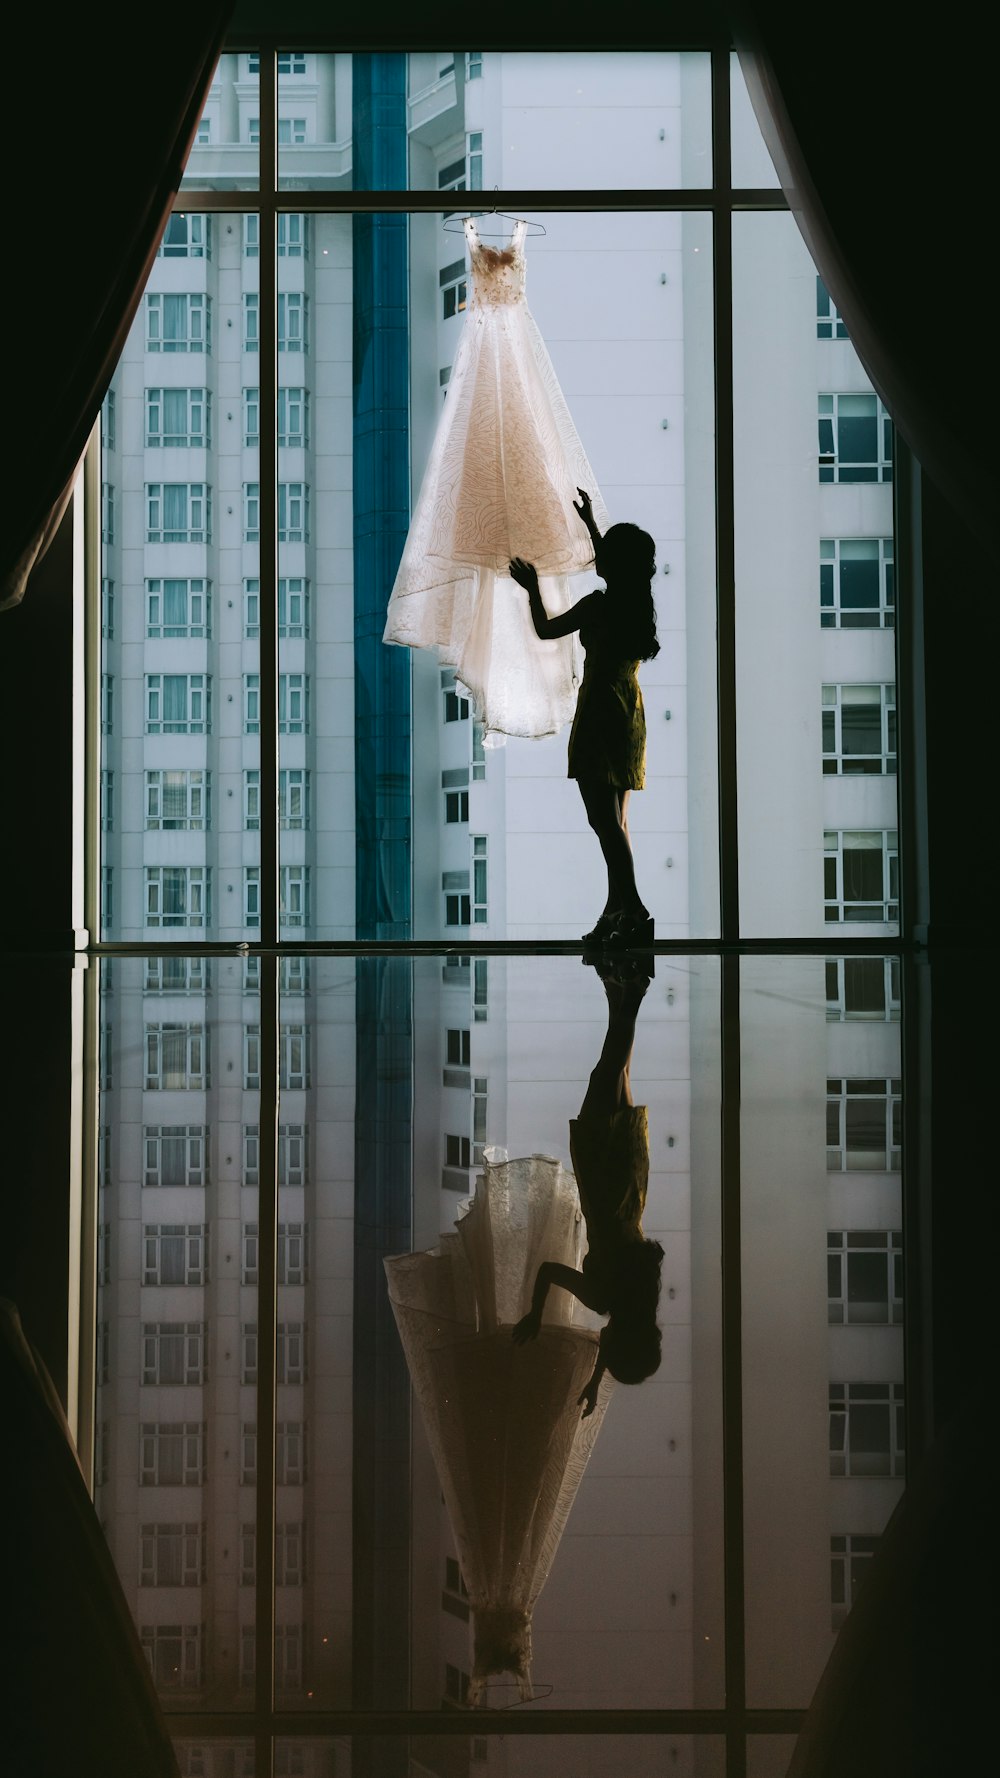 women's white gown hanged on clear glass window